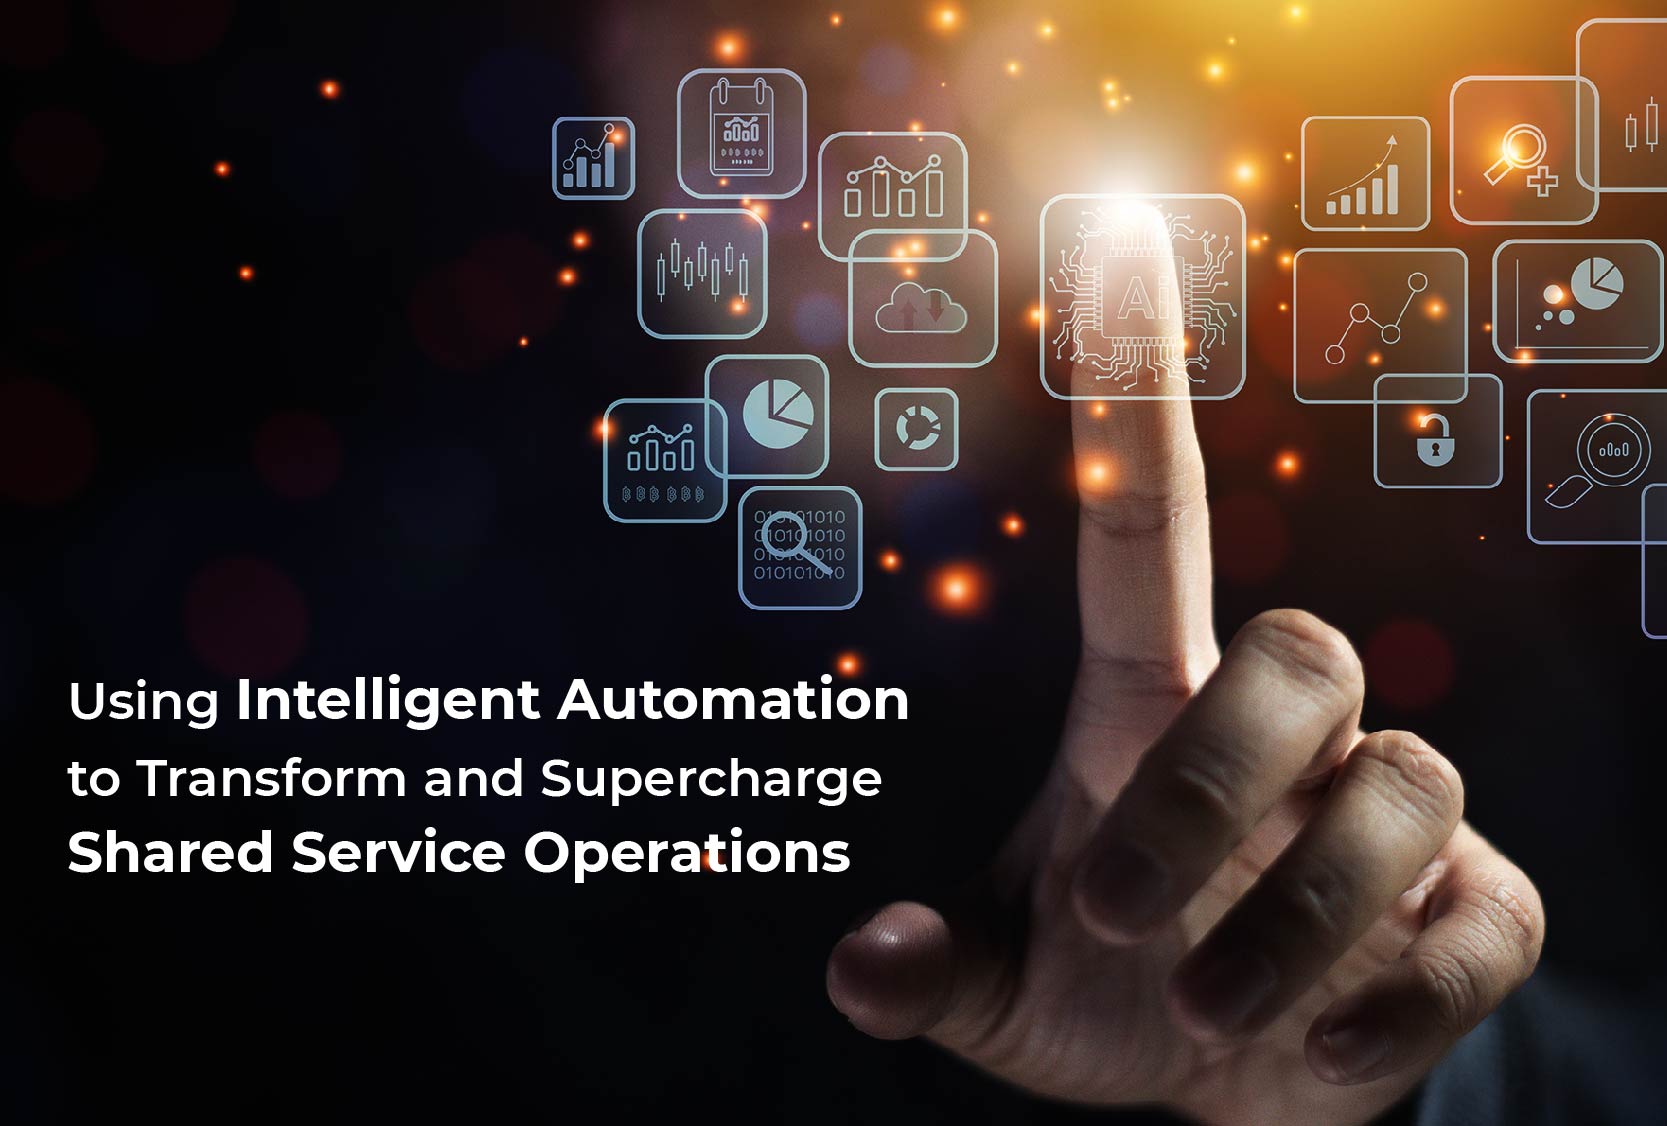 Using Intelligent Automation to Transform and Supercharge Shared Service Operations